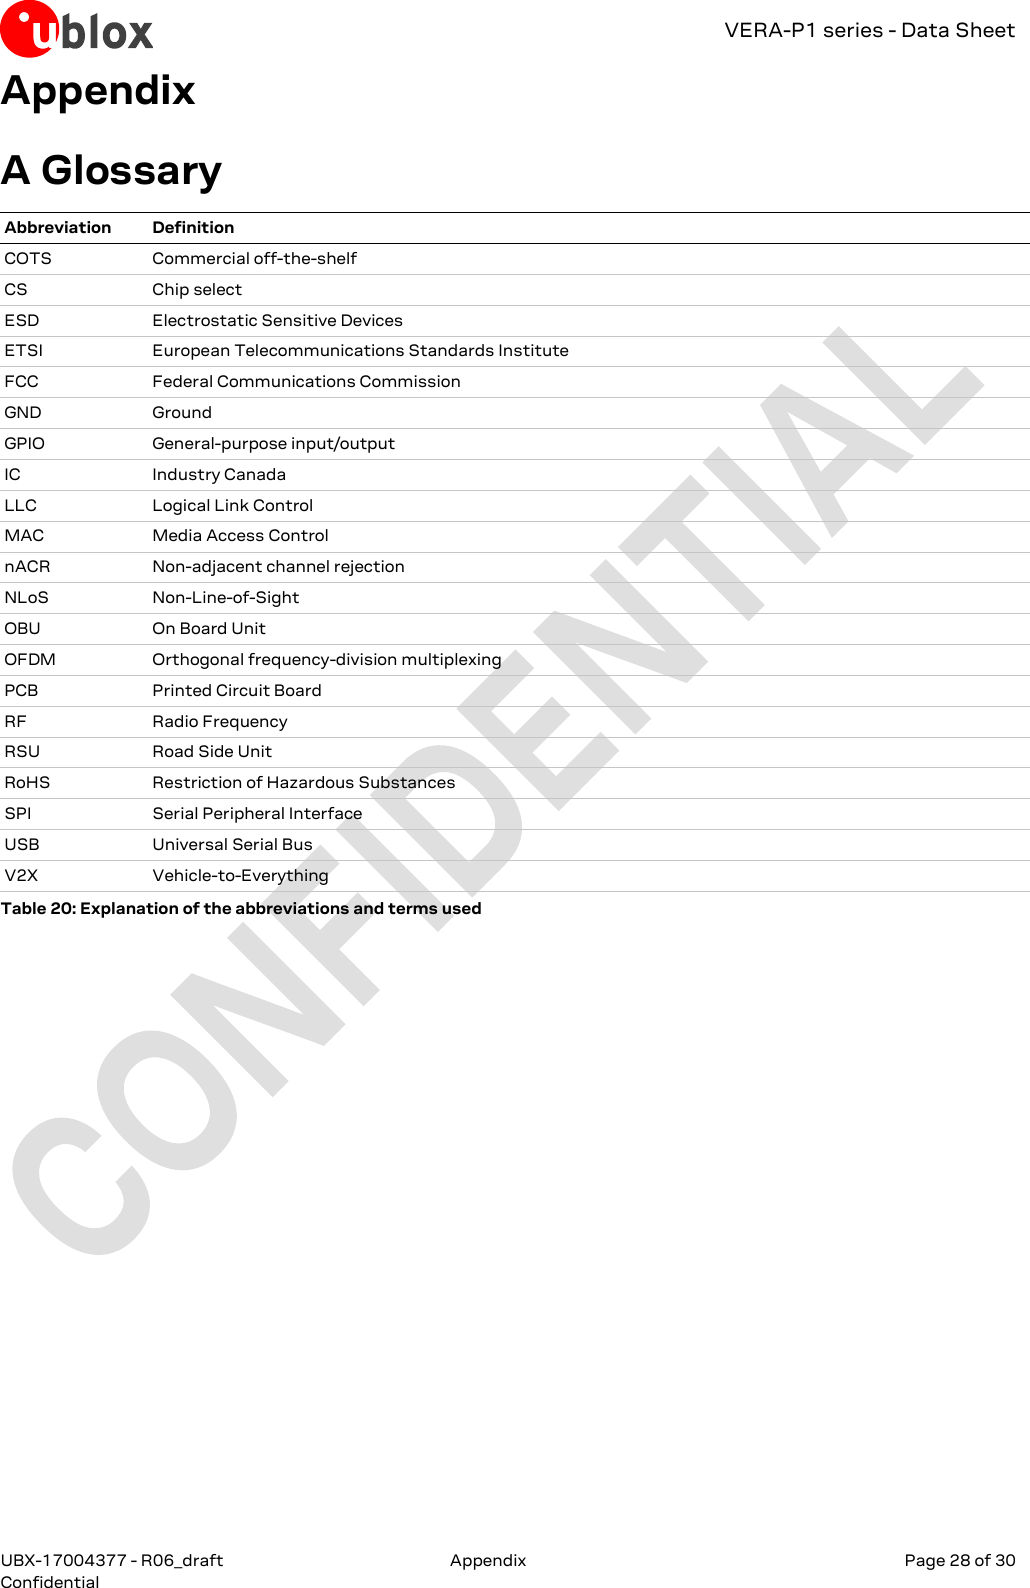 VERA-P1 series - Data Sheet UBX-17004377 - R06_draft  Appendix   Page 28 of 30 Confidential     Appendix  A Glossary Abbreviation Definition COTS Commercial off-the-shelf CS Chip select  ESD Electrostatic Sensitive Devices ETSI European Telecommunications Standards Institute FCC Federal Communications Commission  GND Ground GPIO General-purpose input/output IC Industry Canada  LLC Logical Link Control MAC Media Access Control nACR Non-adjacent channel rejection  NLoS Non-Line-of-Sight OBU On Board Unit OFDM Orthogonal frequency-division multiplexing  PCB Printed Circuit Board RF Radio Frequency RSU Road Side Unit RoHS Restriction of Hazardous Substances SPI Serial Peripheral Interface USB Universal Serial Bus V2X Vehicle-to-Everything Table 20: Explanation of the abbreviations and terms used   